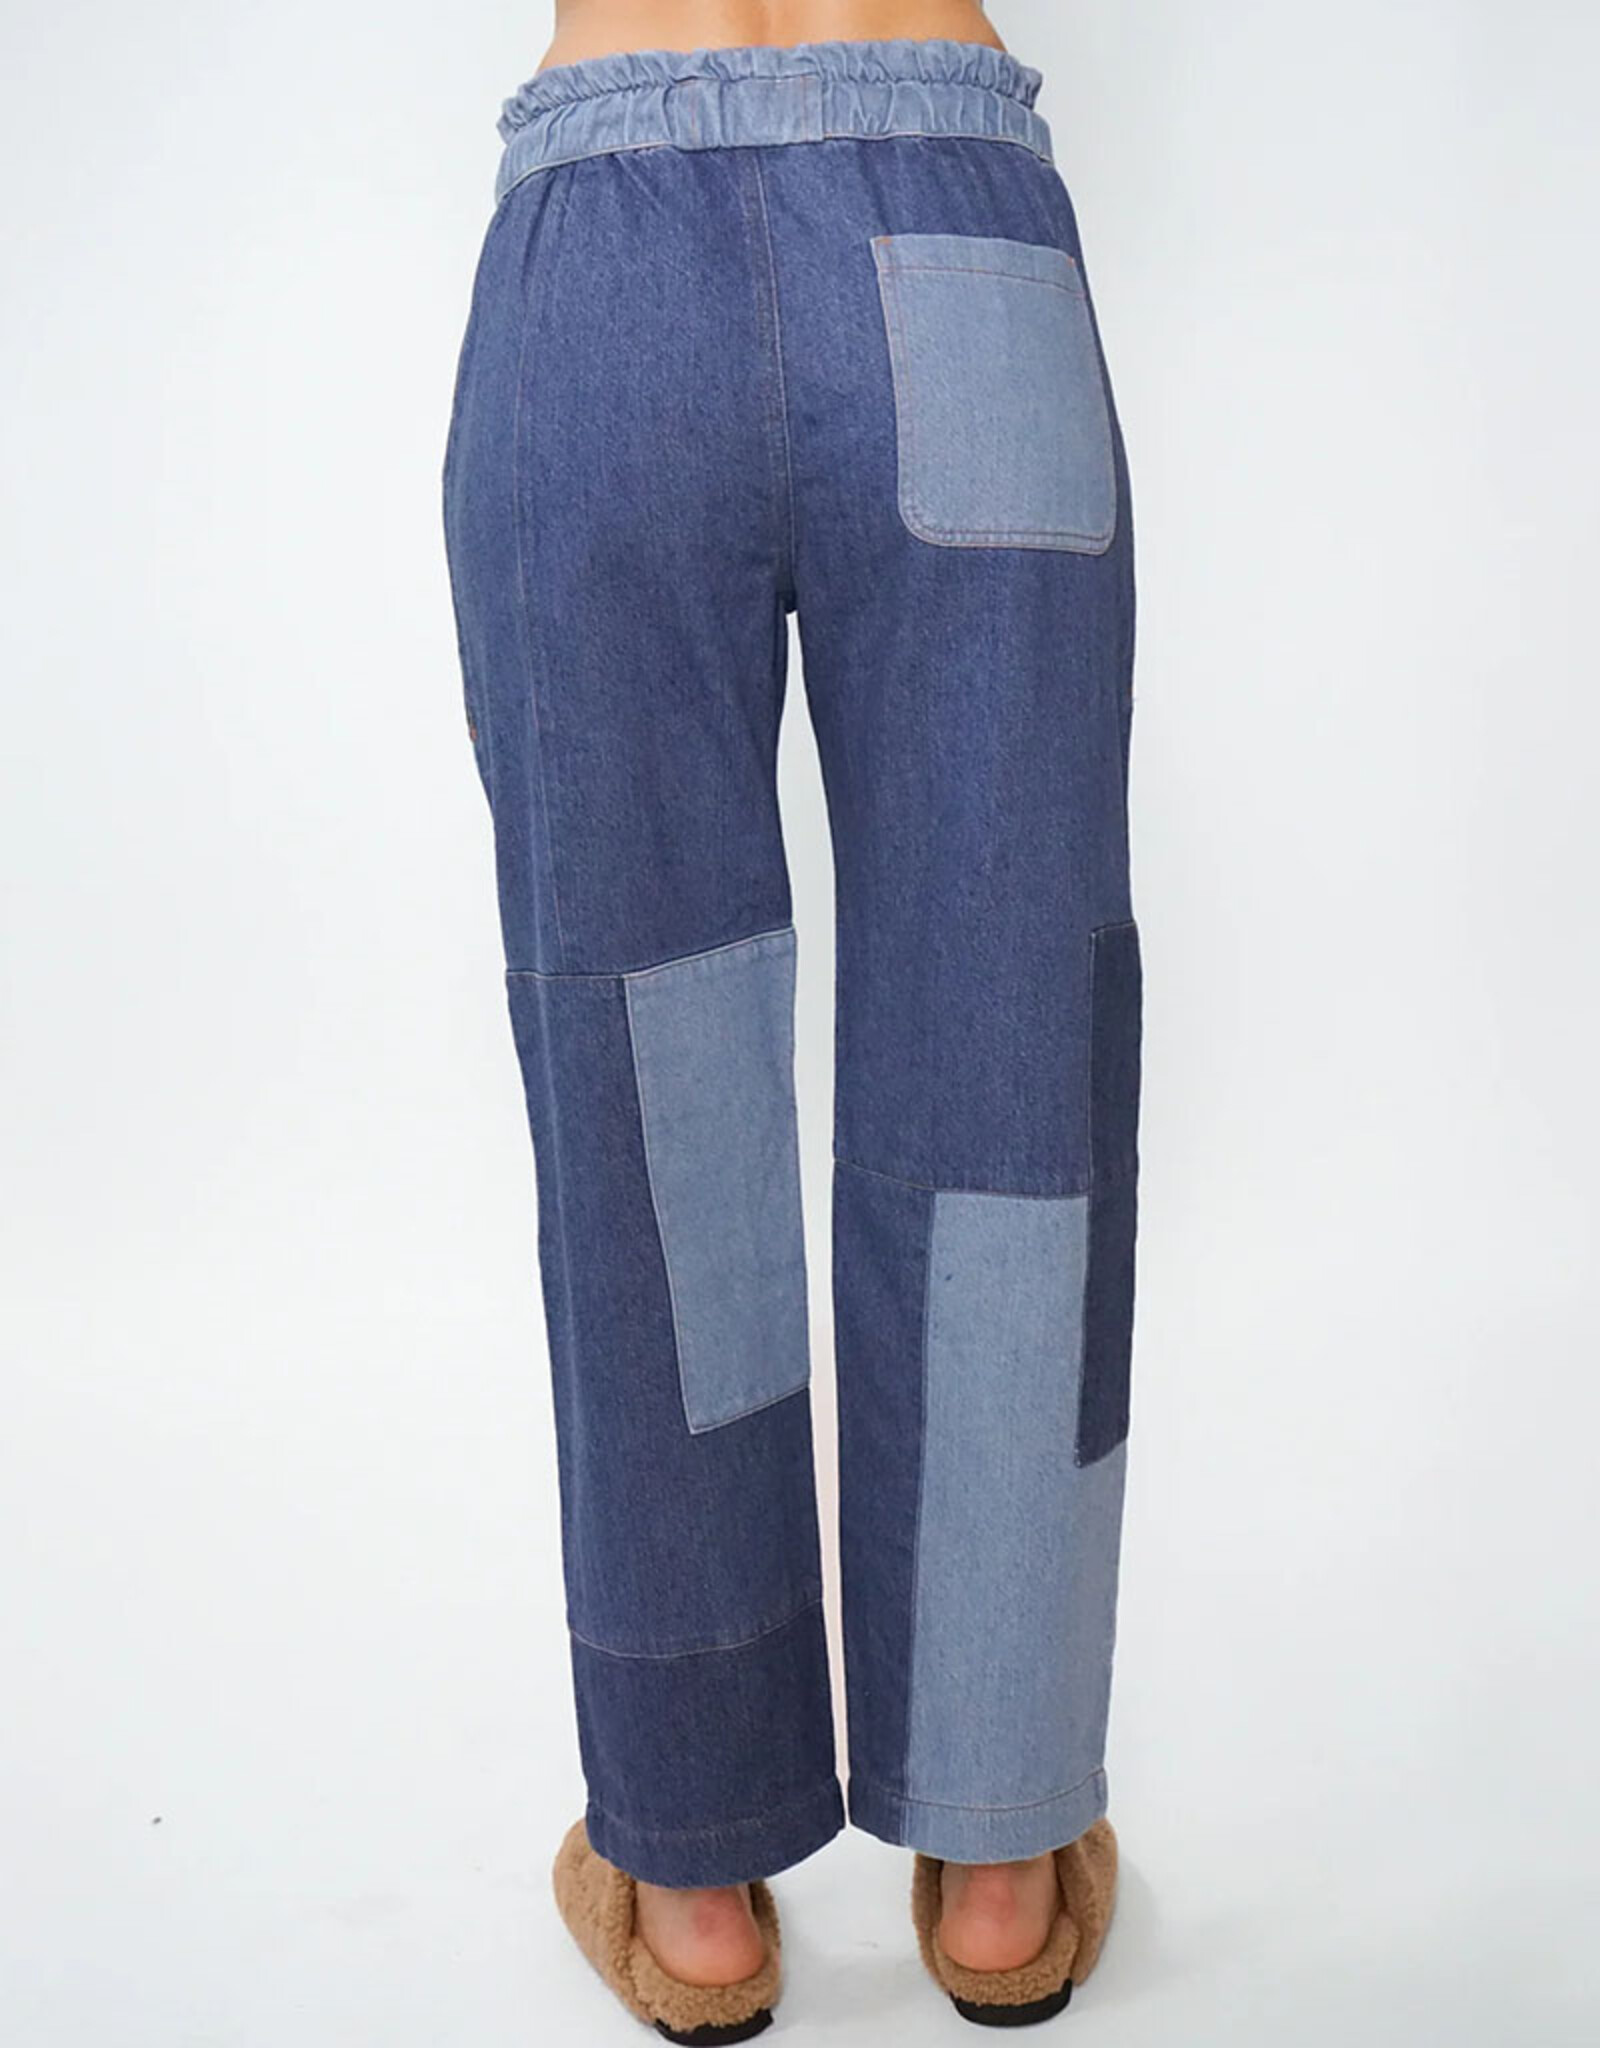 ELECTRIC & ROSE EASY PANT PATCHWORK